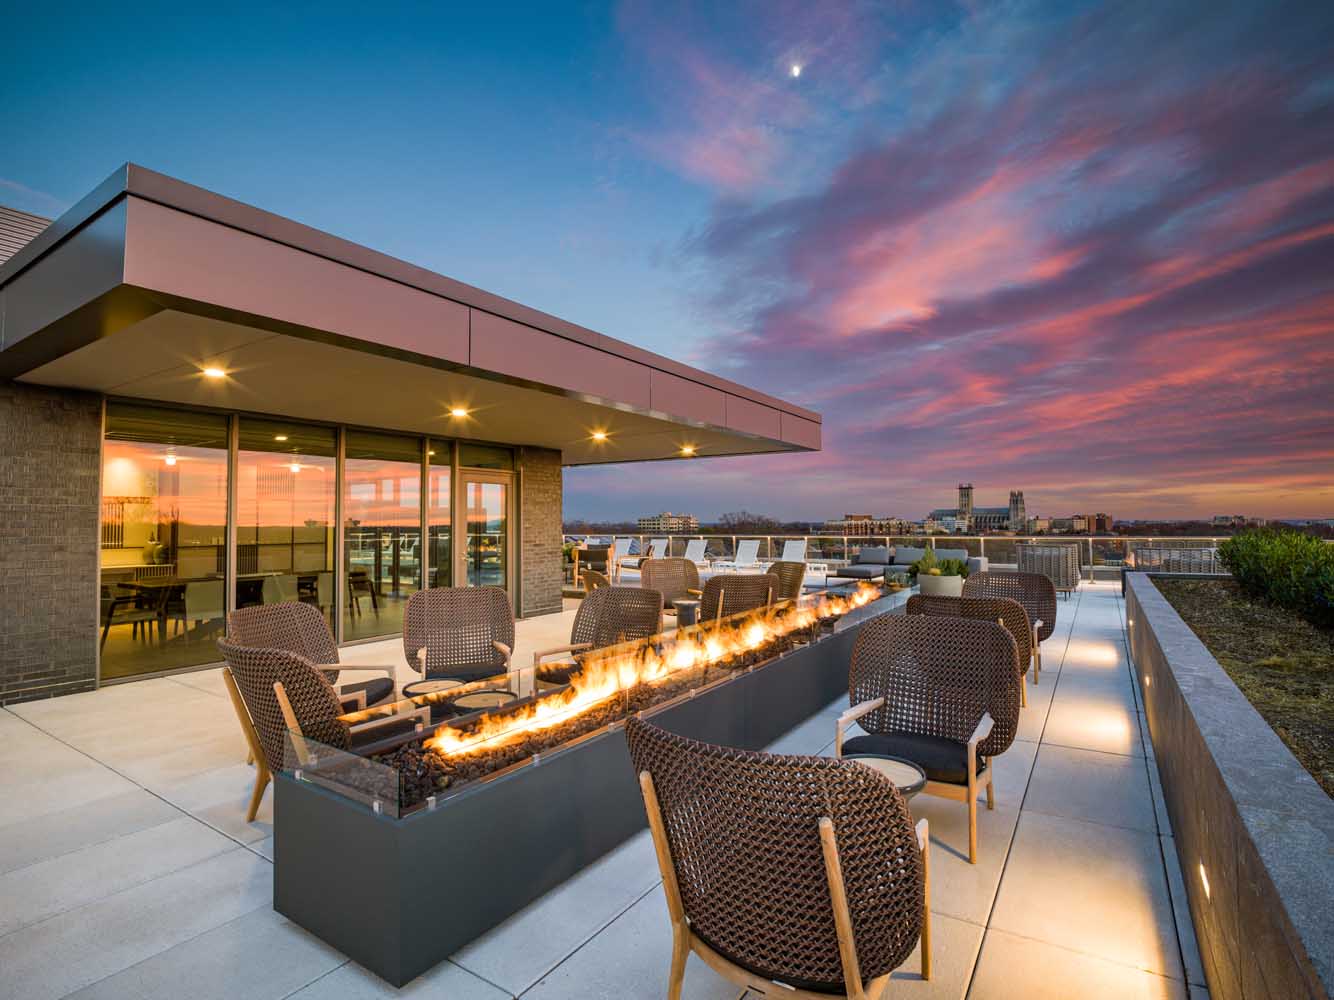 Enjoy the rooftop entertainment suite over the warmth of the outdoor fireplace